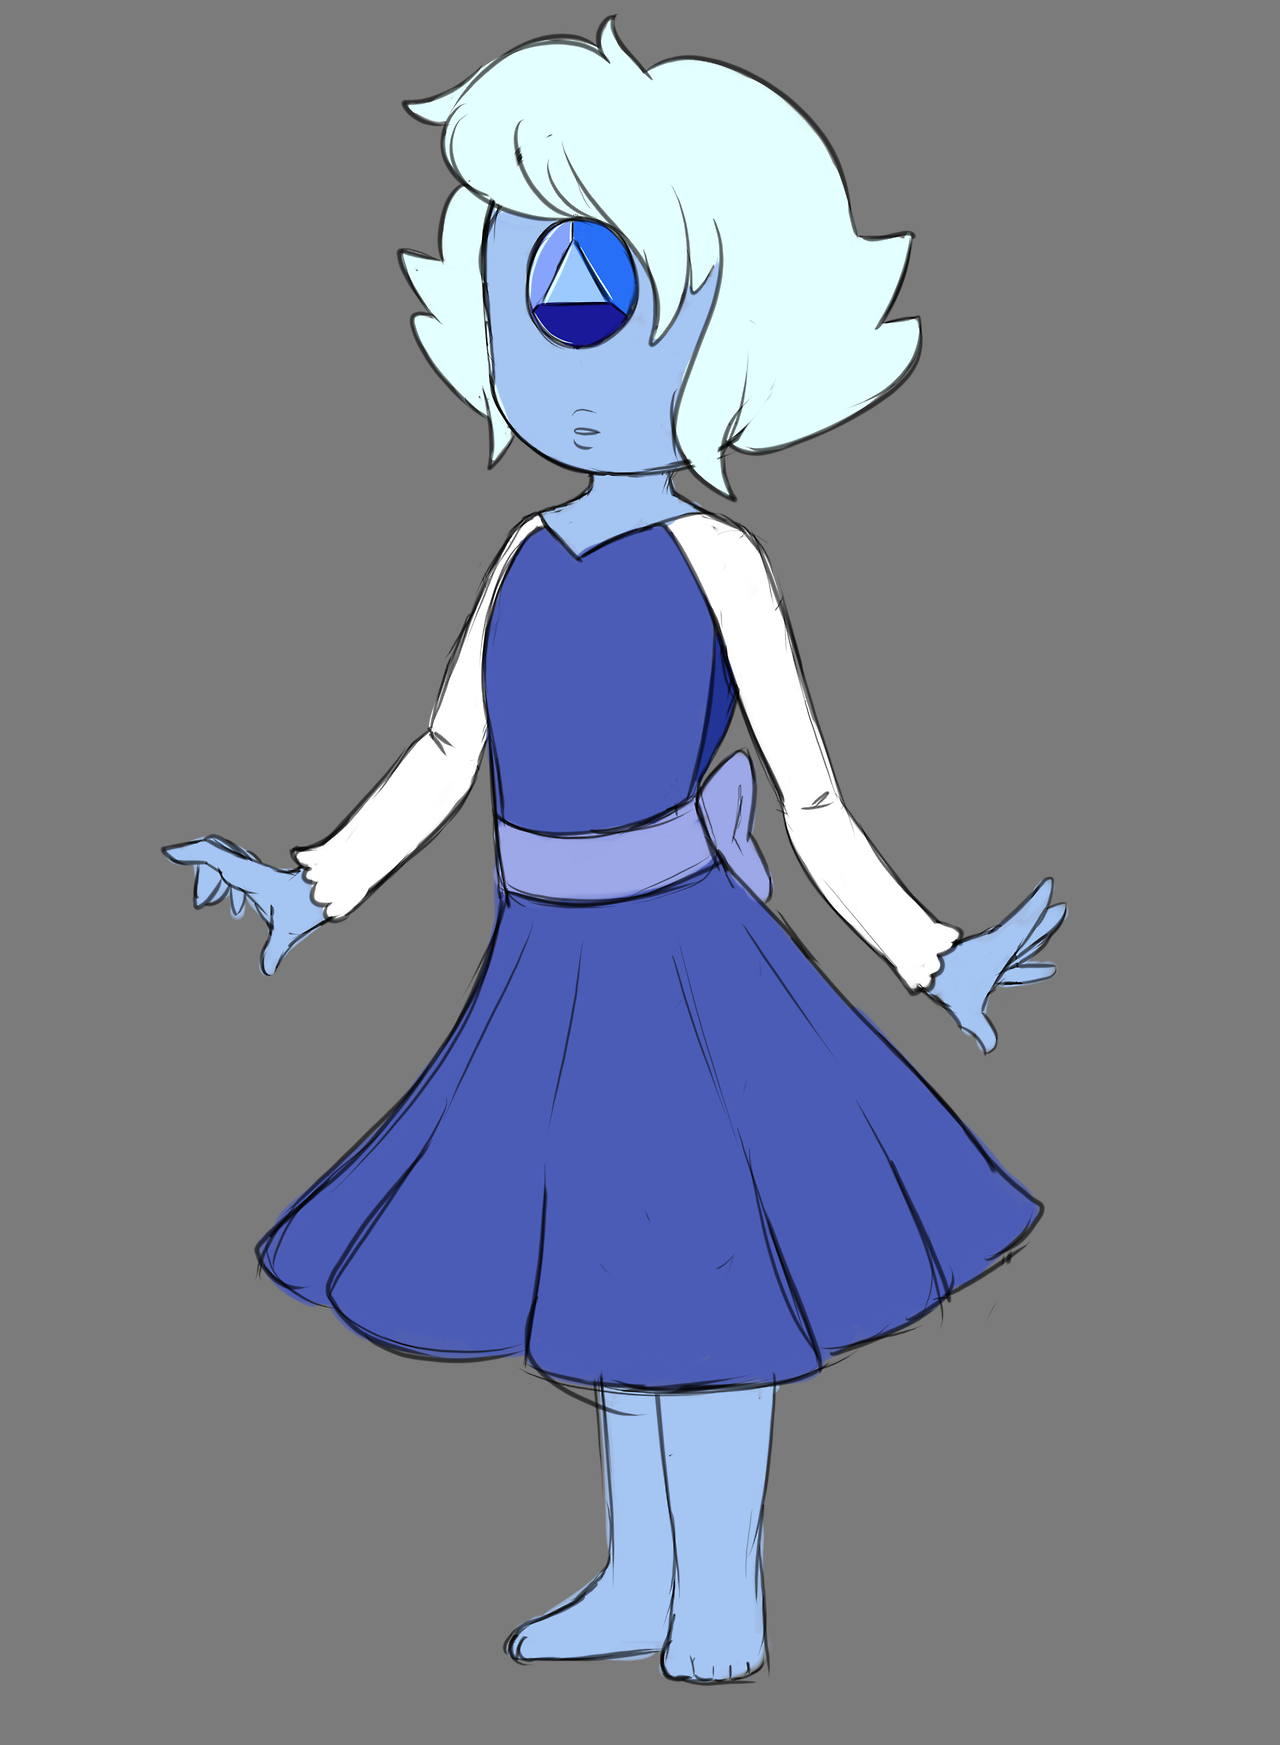 so you guys remember the Ruby Gemsona I did for @itsdancakes right? well I was digging through some old sketch books and found an old meme of an oc. a sapphire with an eye gem, she is defective and...